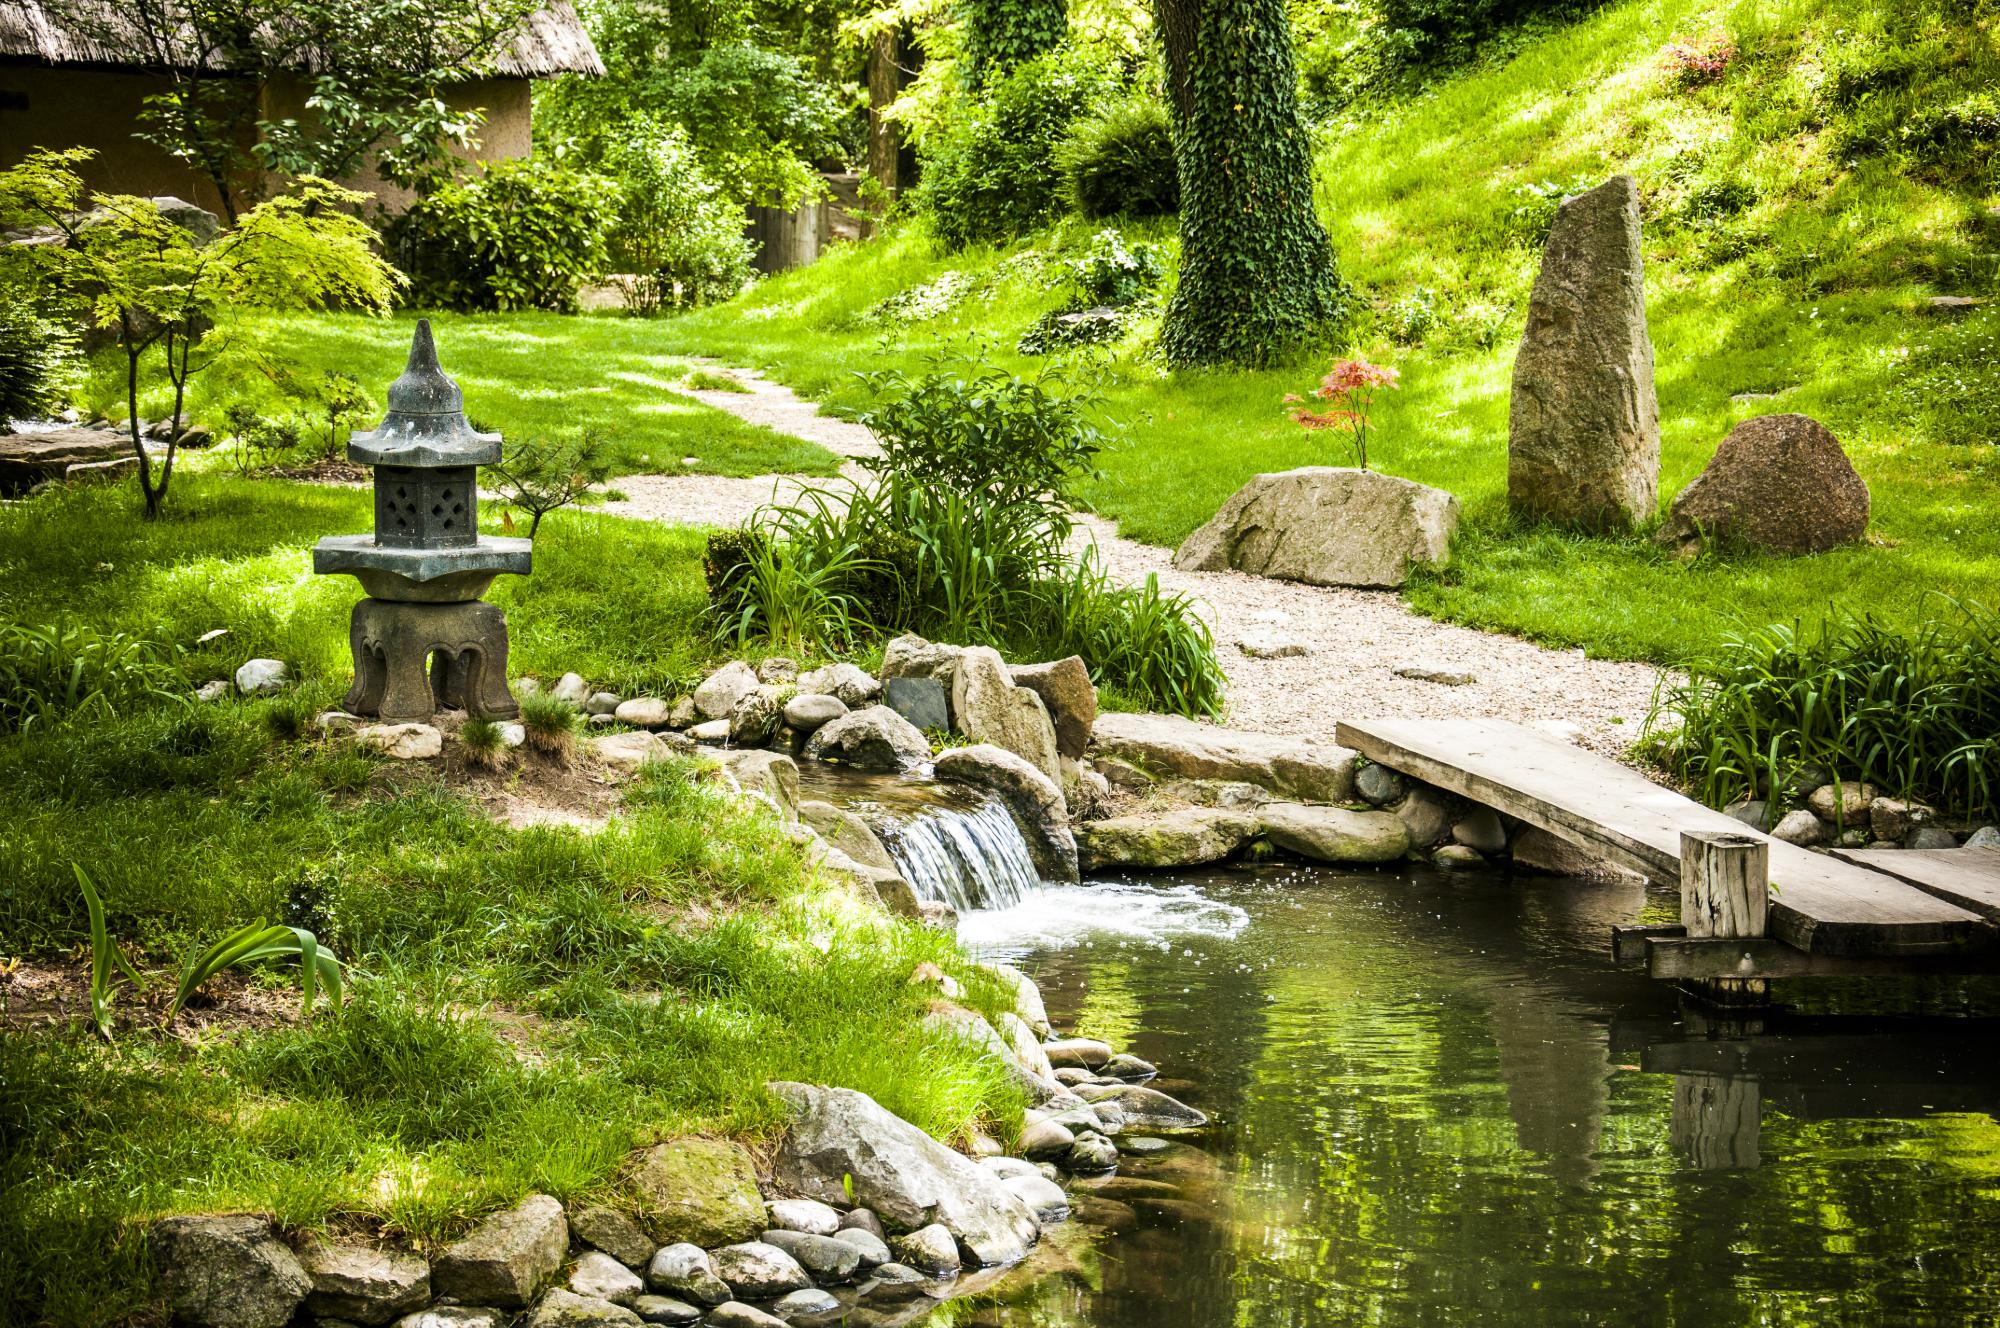 Clearing for Meditation Gardens: Finding Serenity